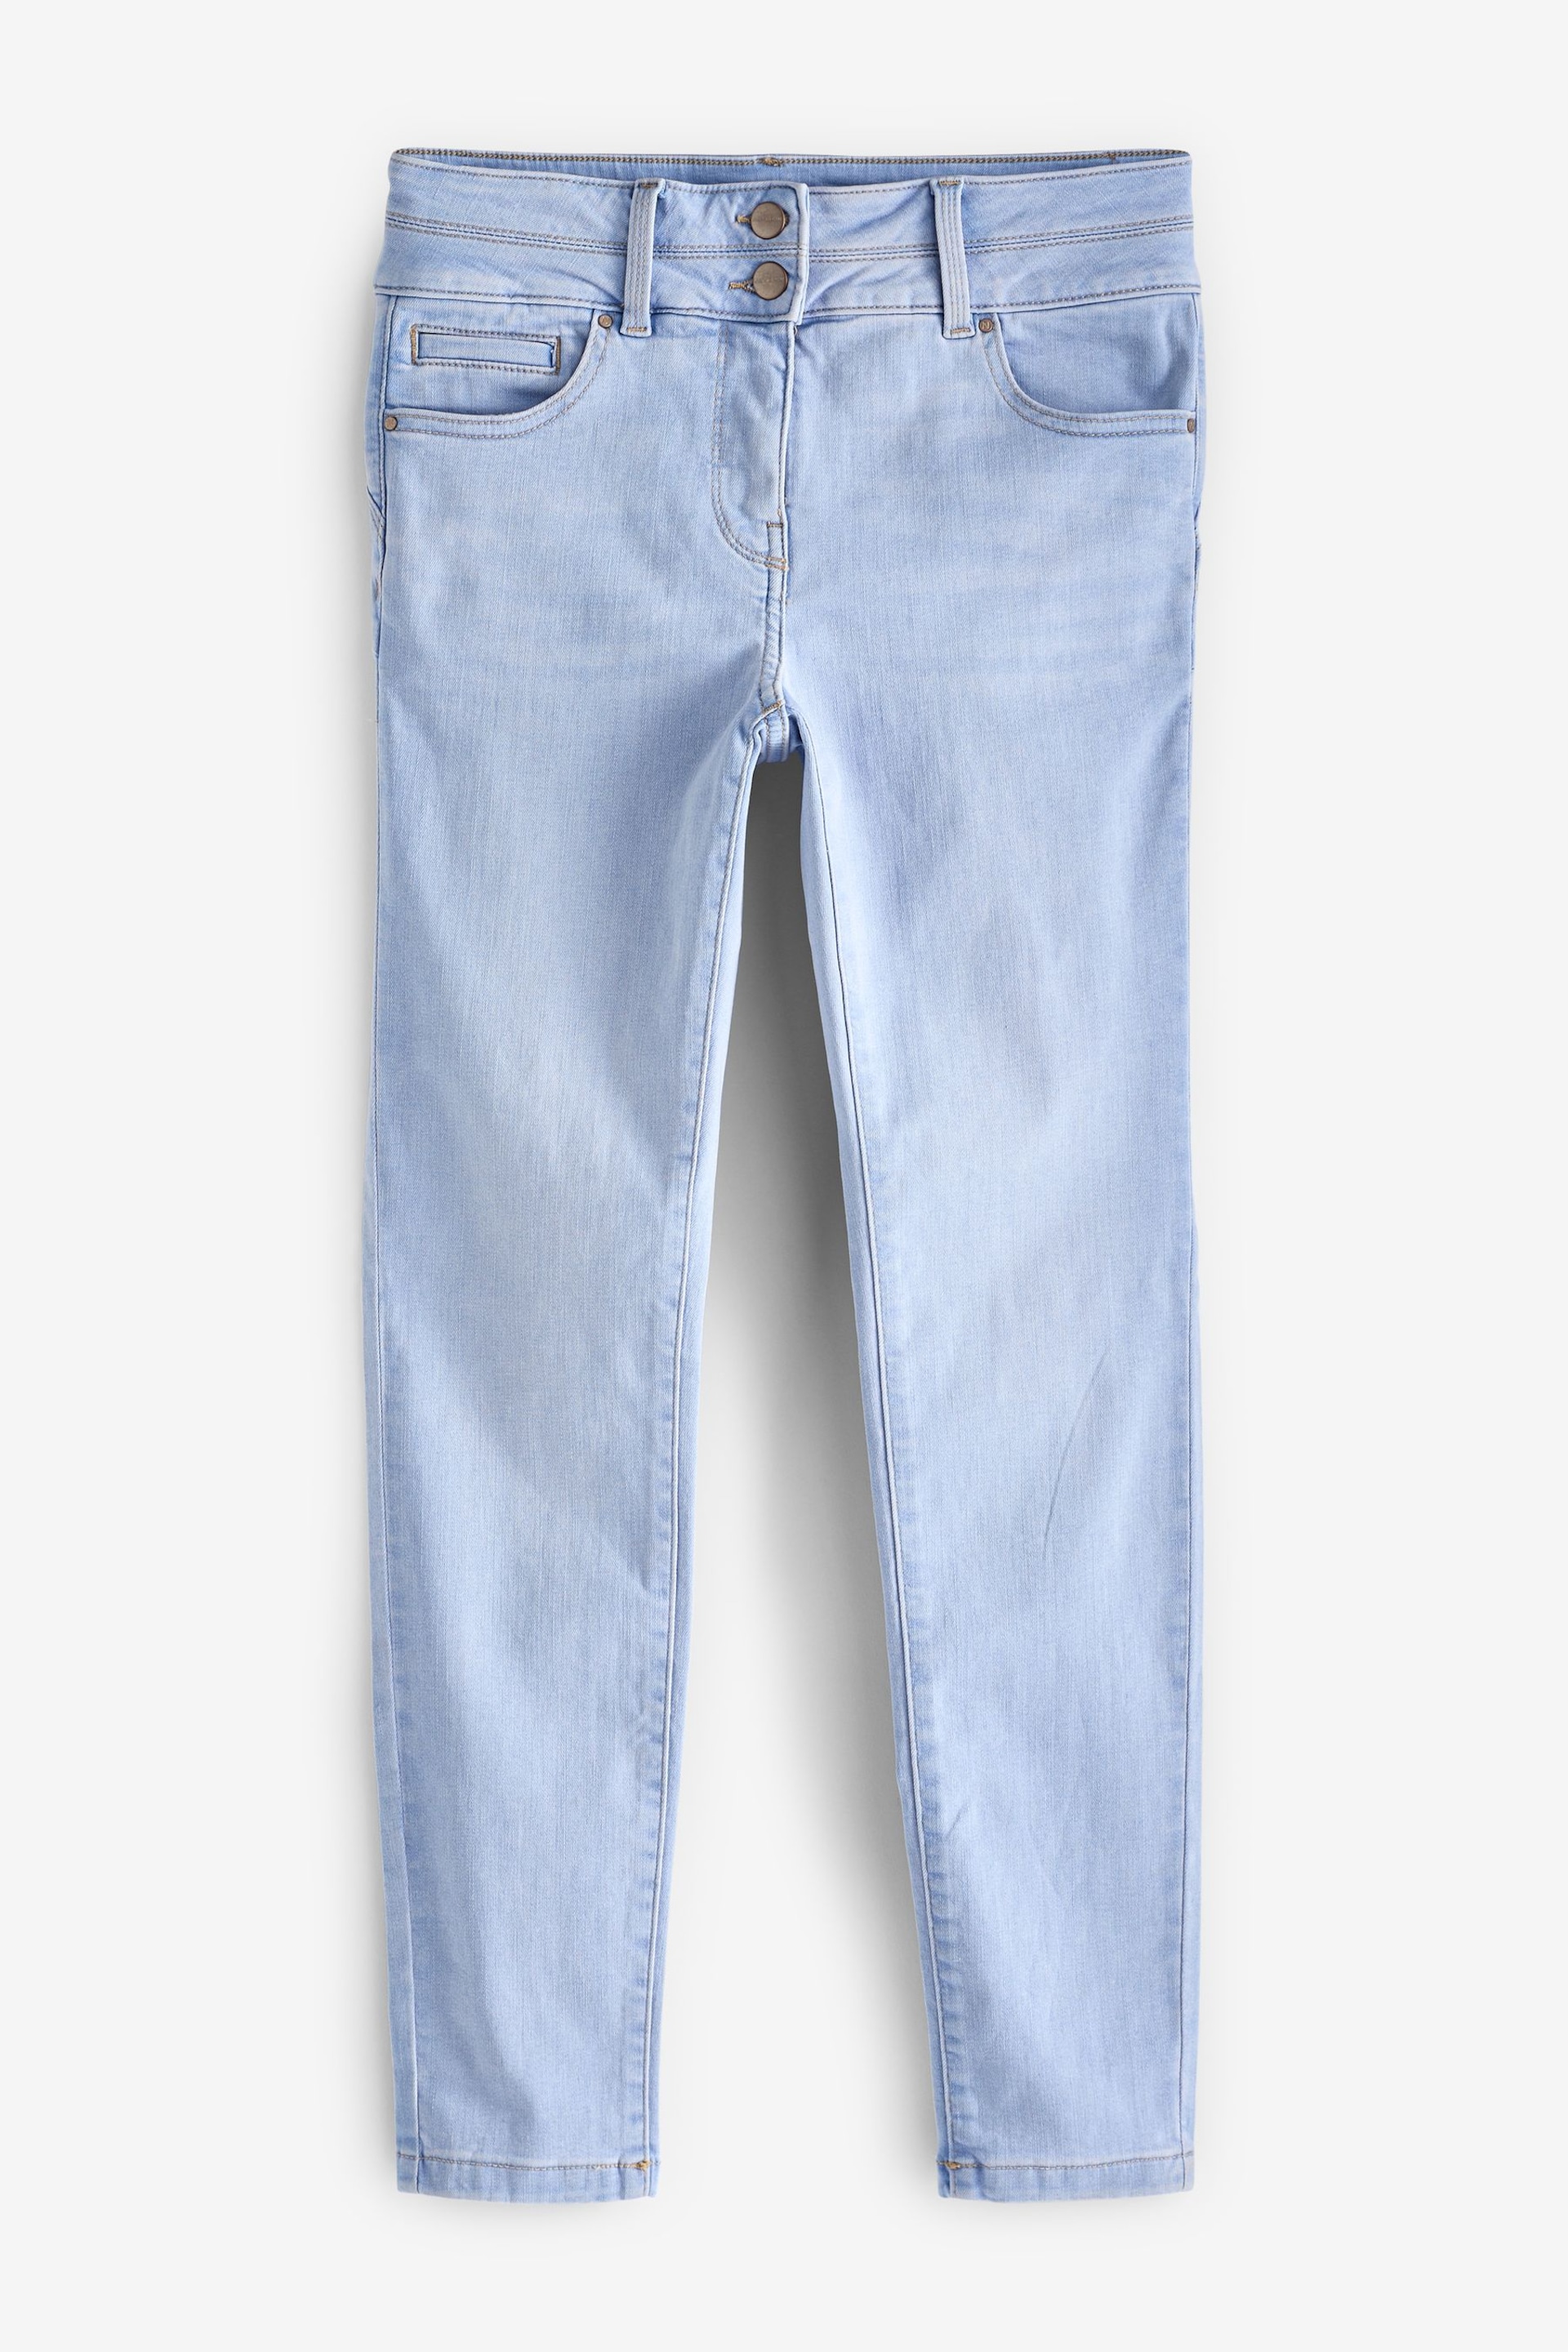 Bleach Blue Lift Slim And Shape Skinny Jeans - Image 7 of 8